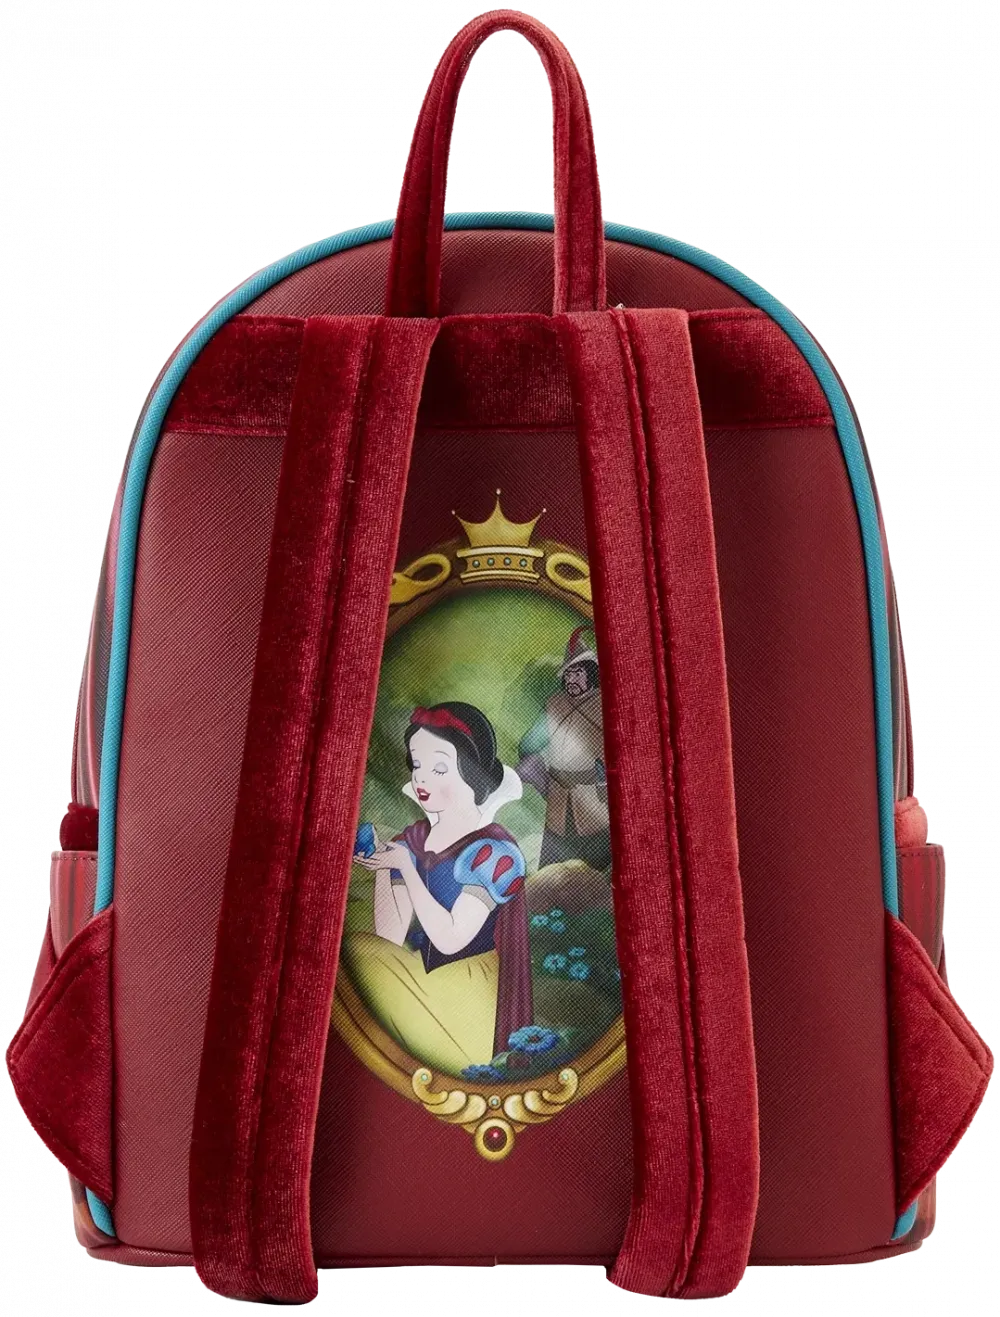 Snow White Evil Queen Throne Mini Backpack Loungefly